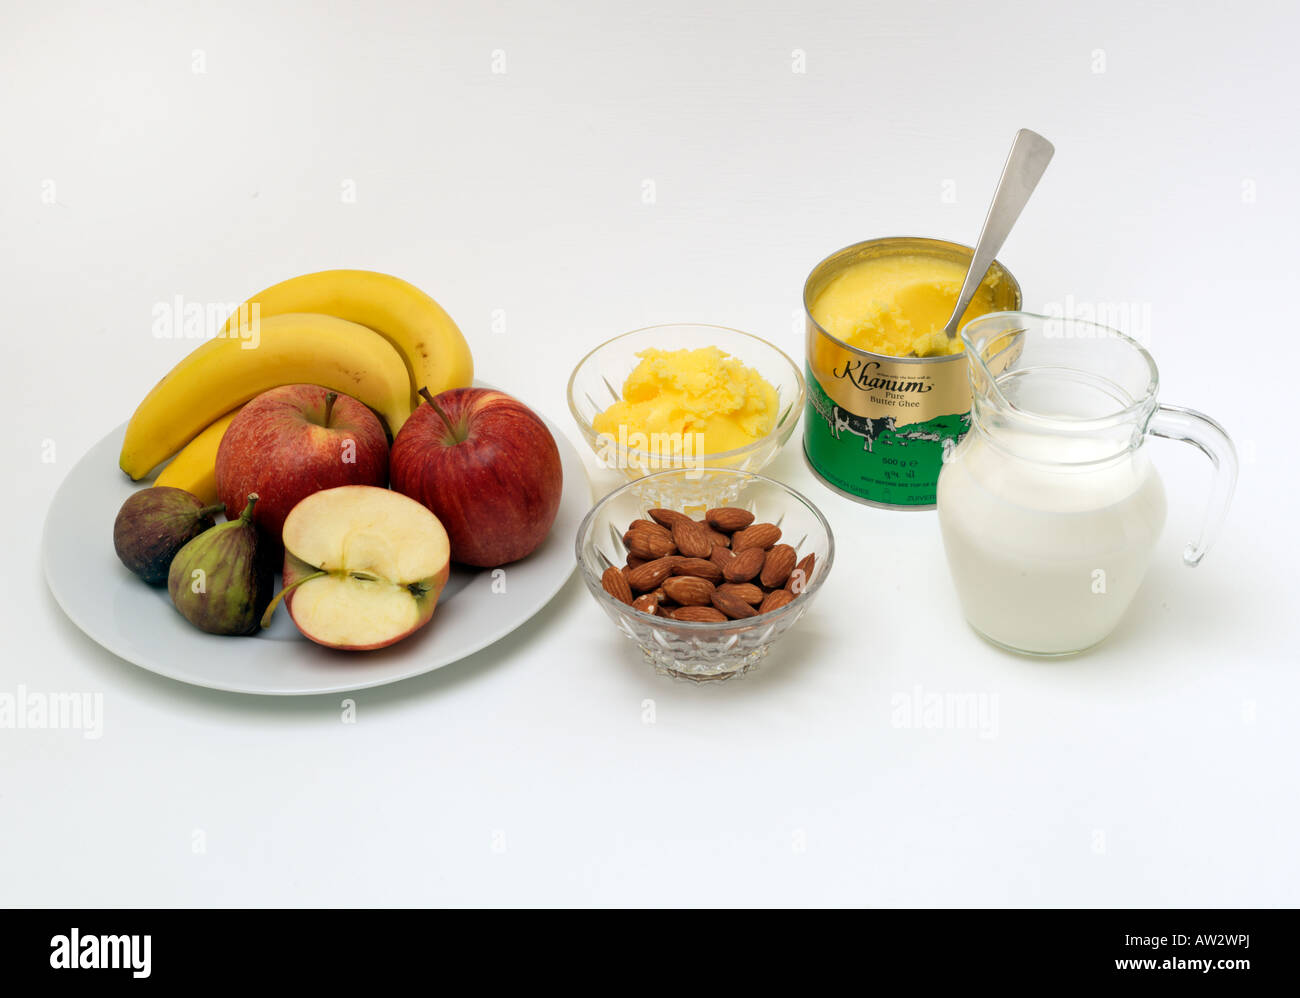 Sattva Foods Almonds Milk Ghee Figs Apples and Bananas Stock Photo